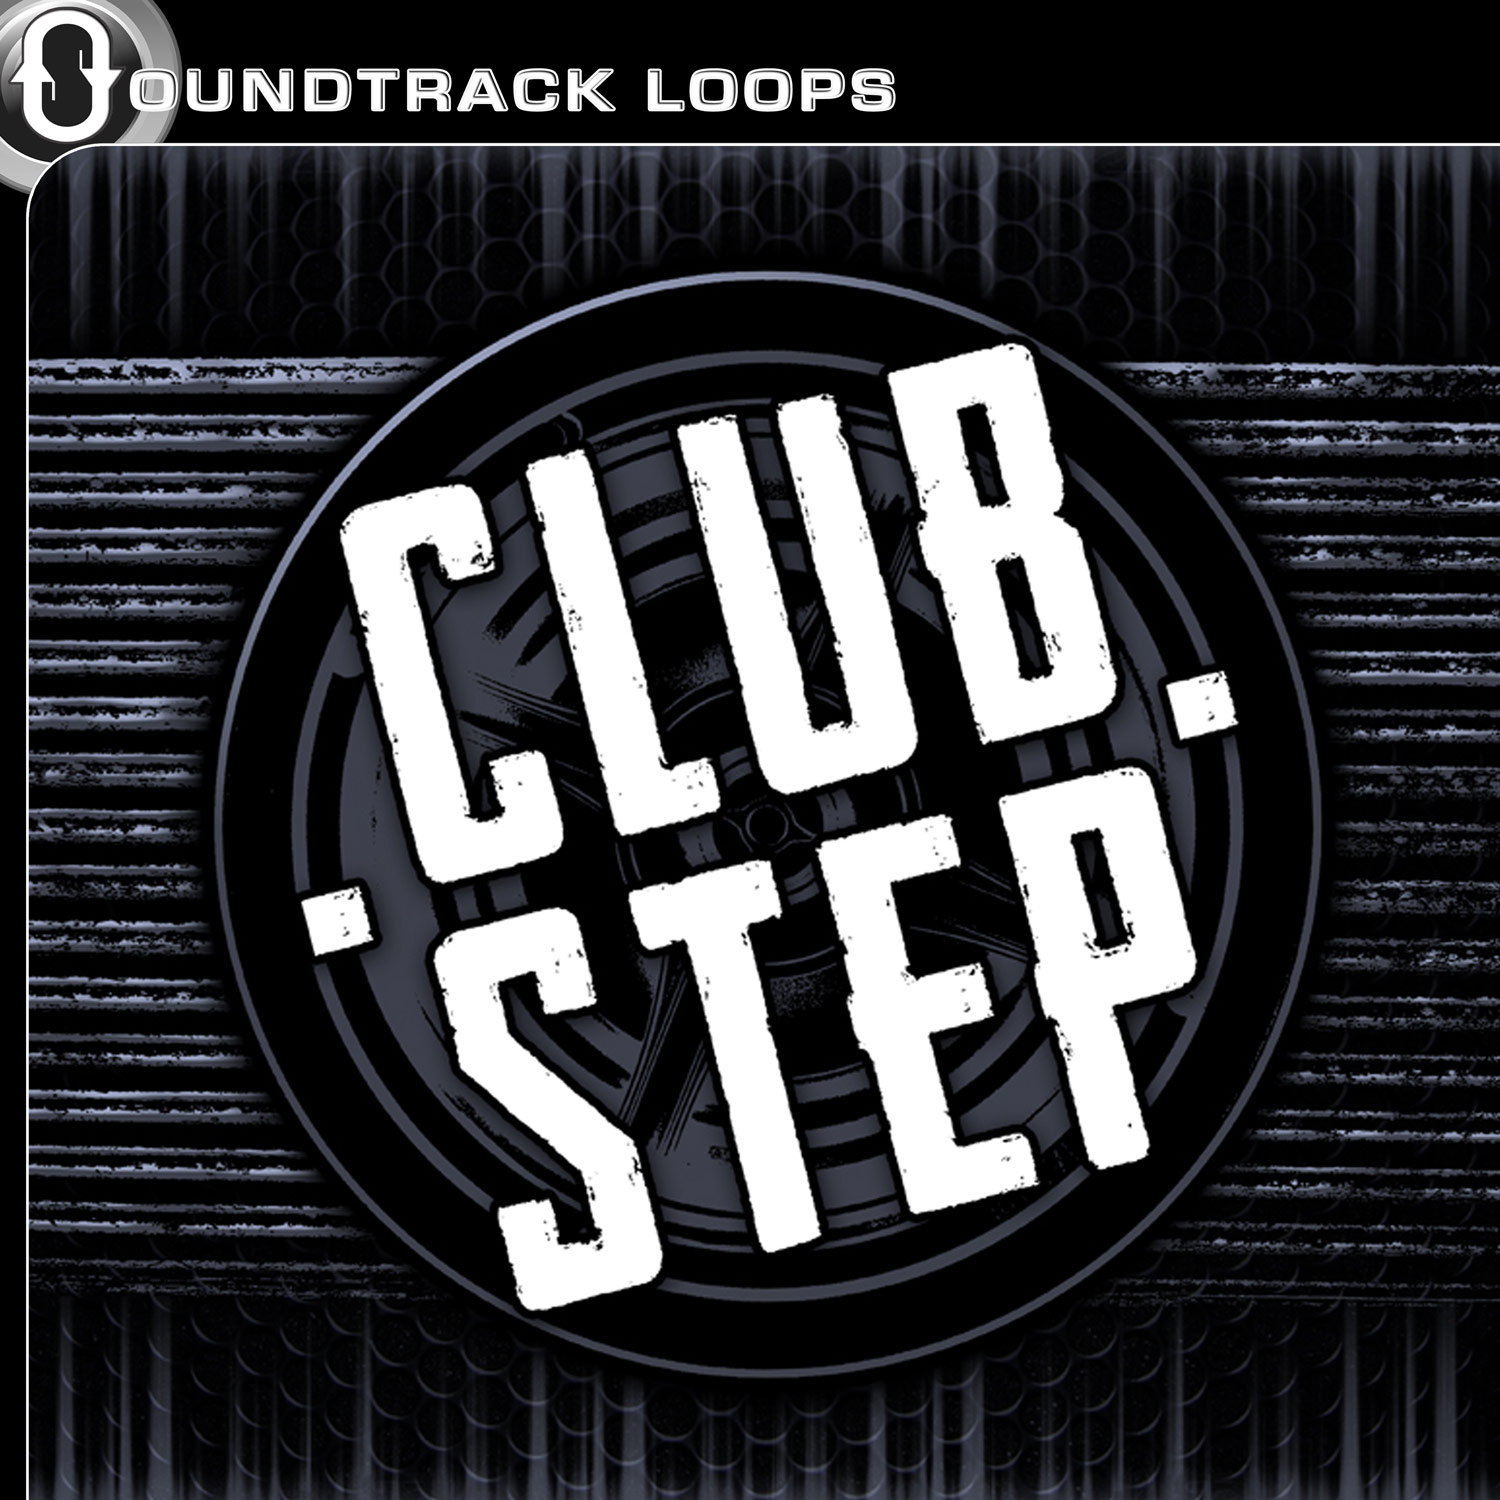 Clubstep From Soundtrack Loops-0